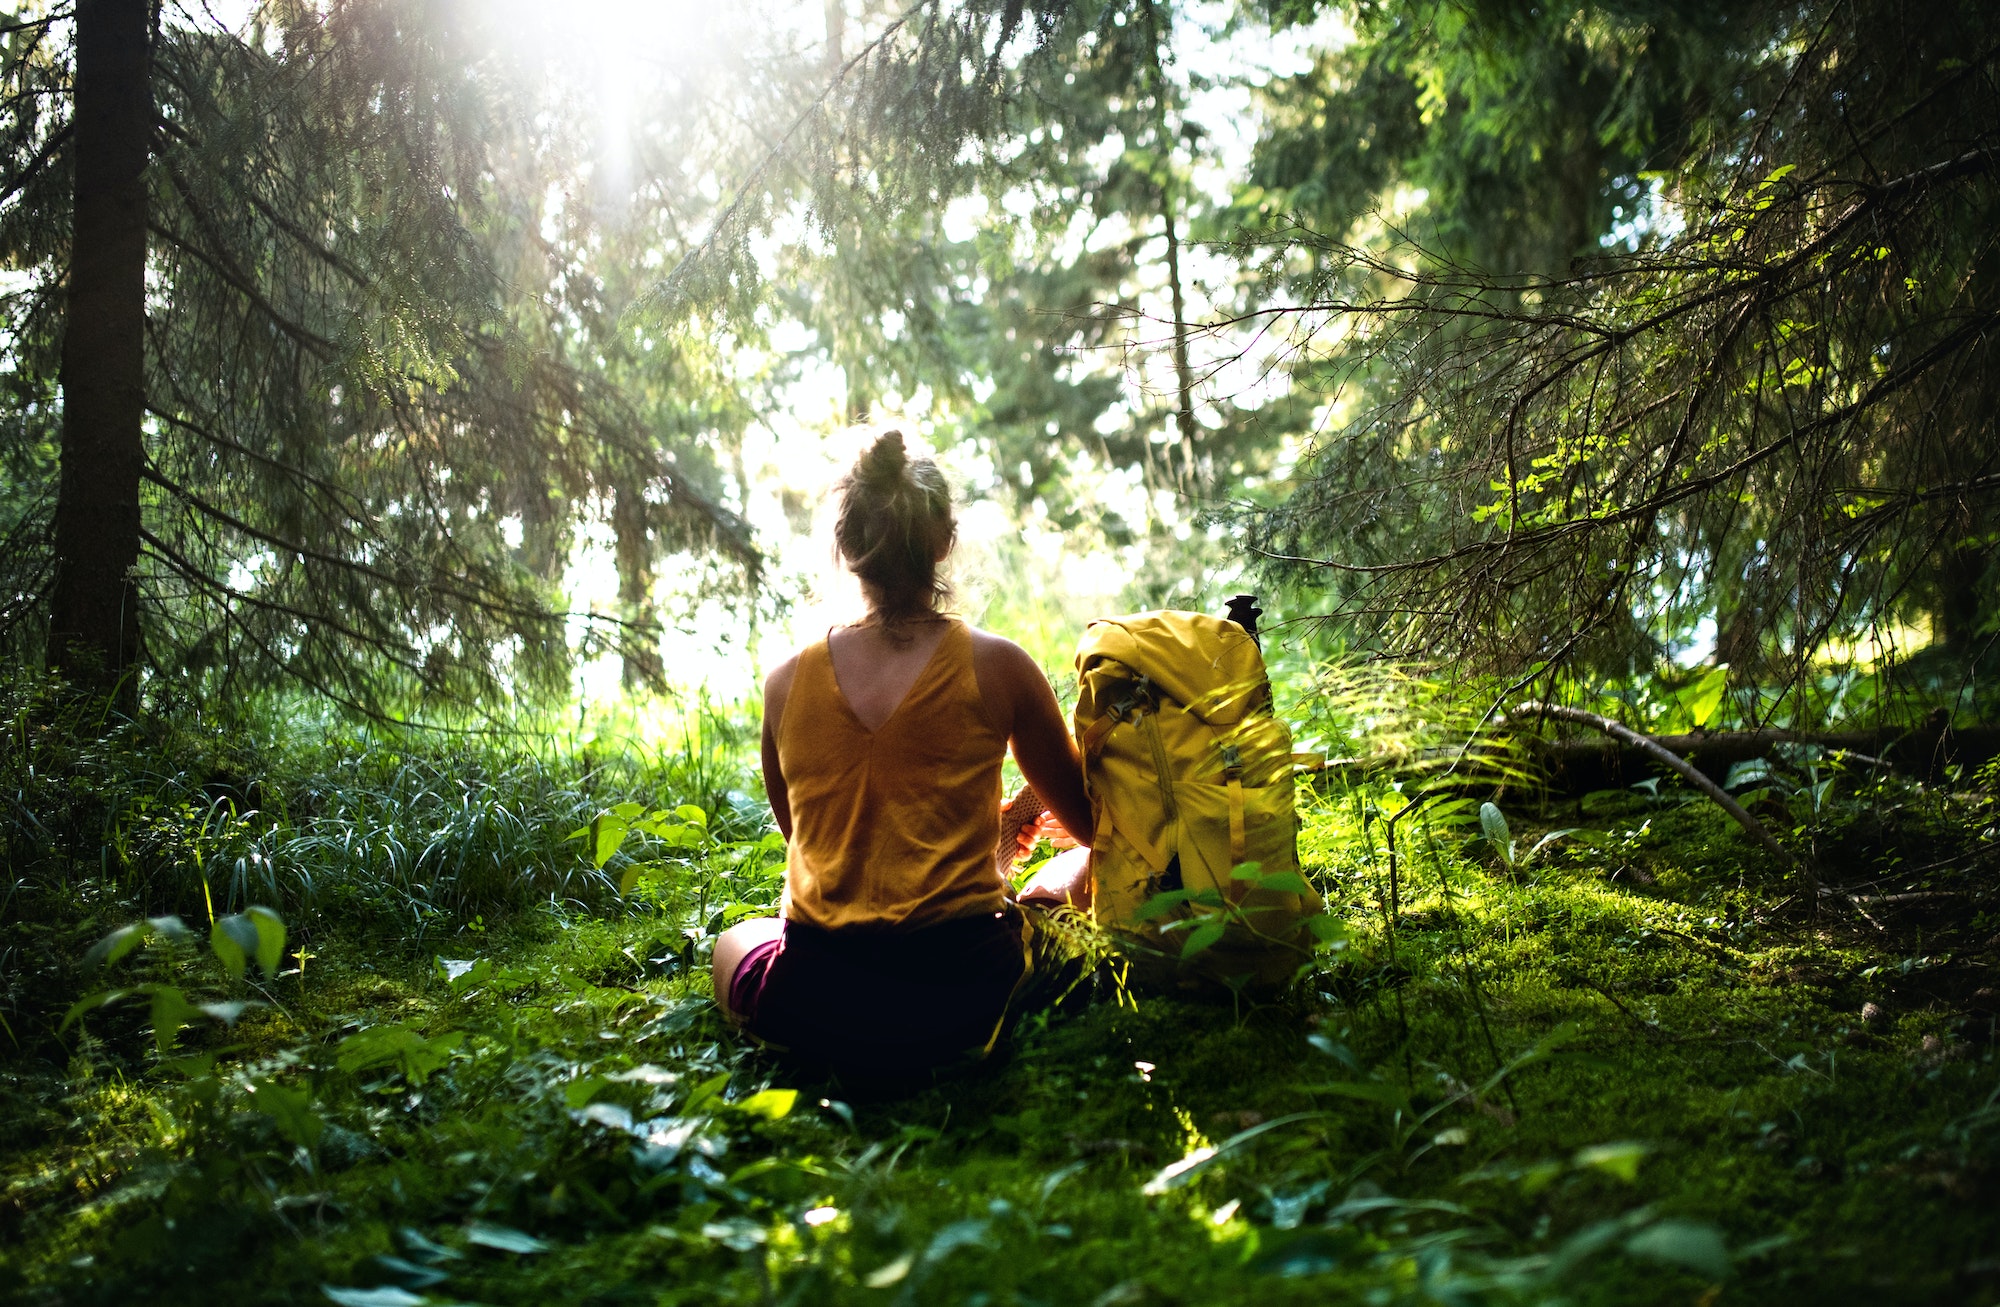 Rear view of woman hiker sitting on the ground outdoors in forest, resting.